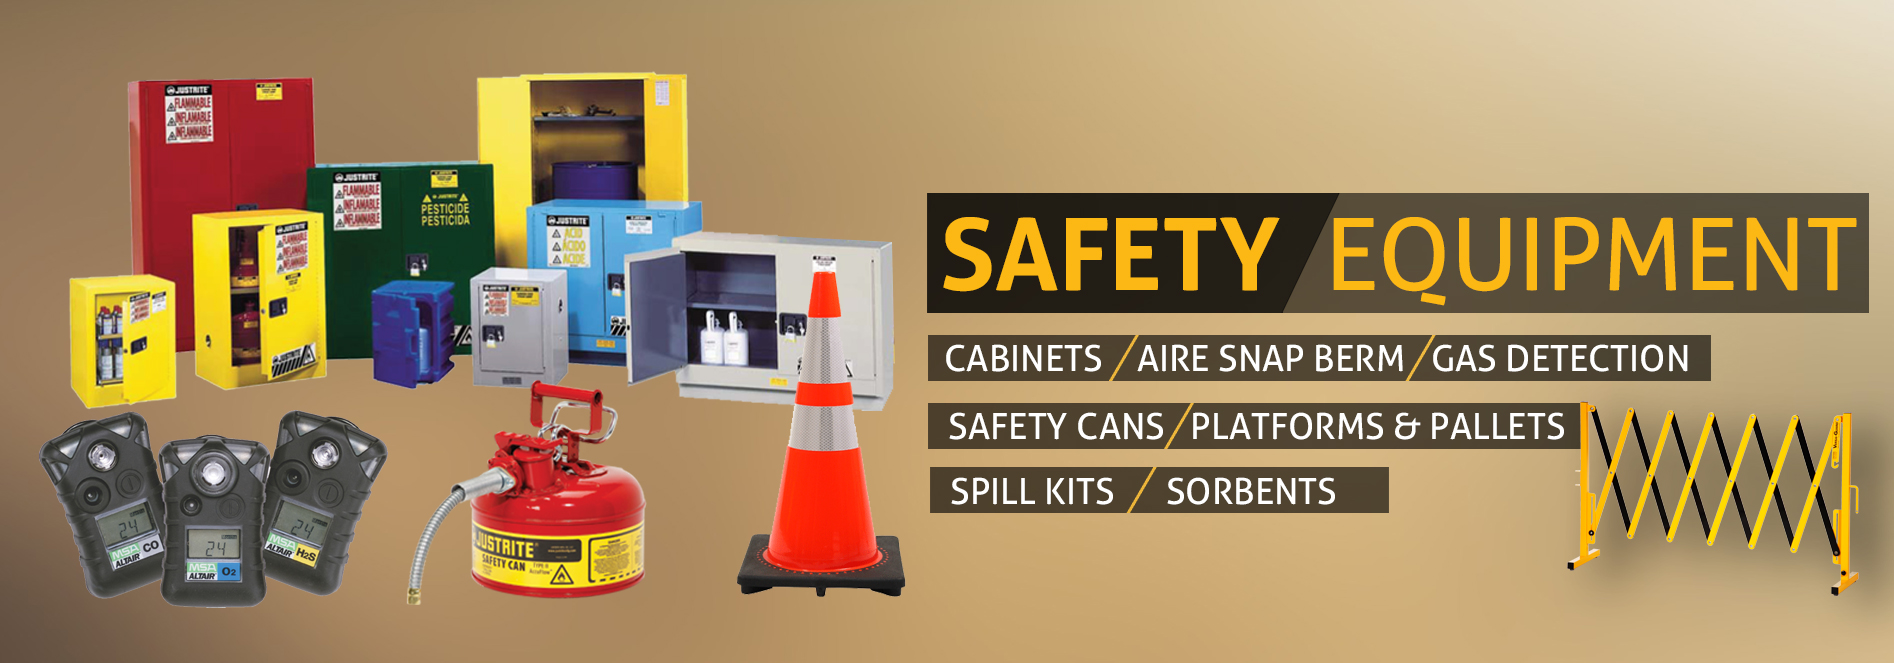 SAFETY EQUIPMENTS | CABINETS | GAS DETECTORS | SPILL KITS | AIRE SNAP BERM | PLATFORMS & PALLETS | GUARDS & PROTECTION, TRAFFIC SAFETY & BARRICADES | Al Asayel Health & Safety